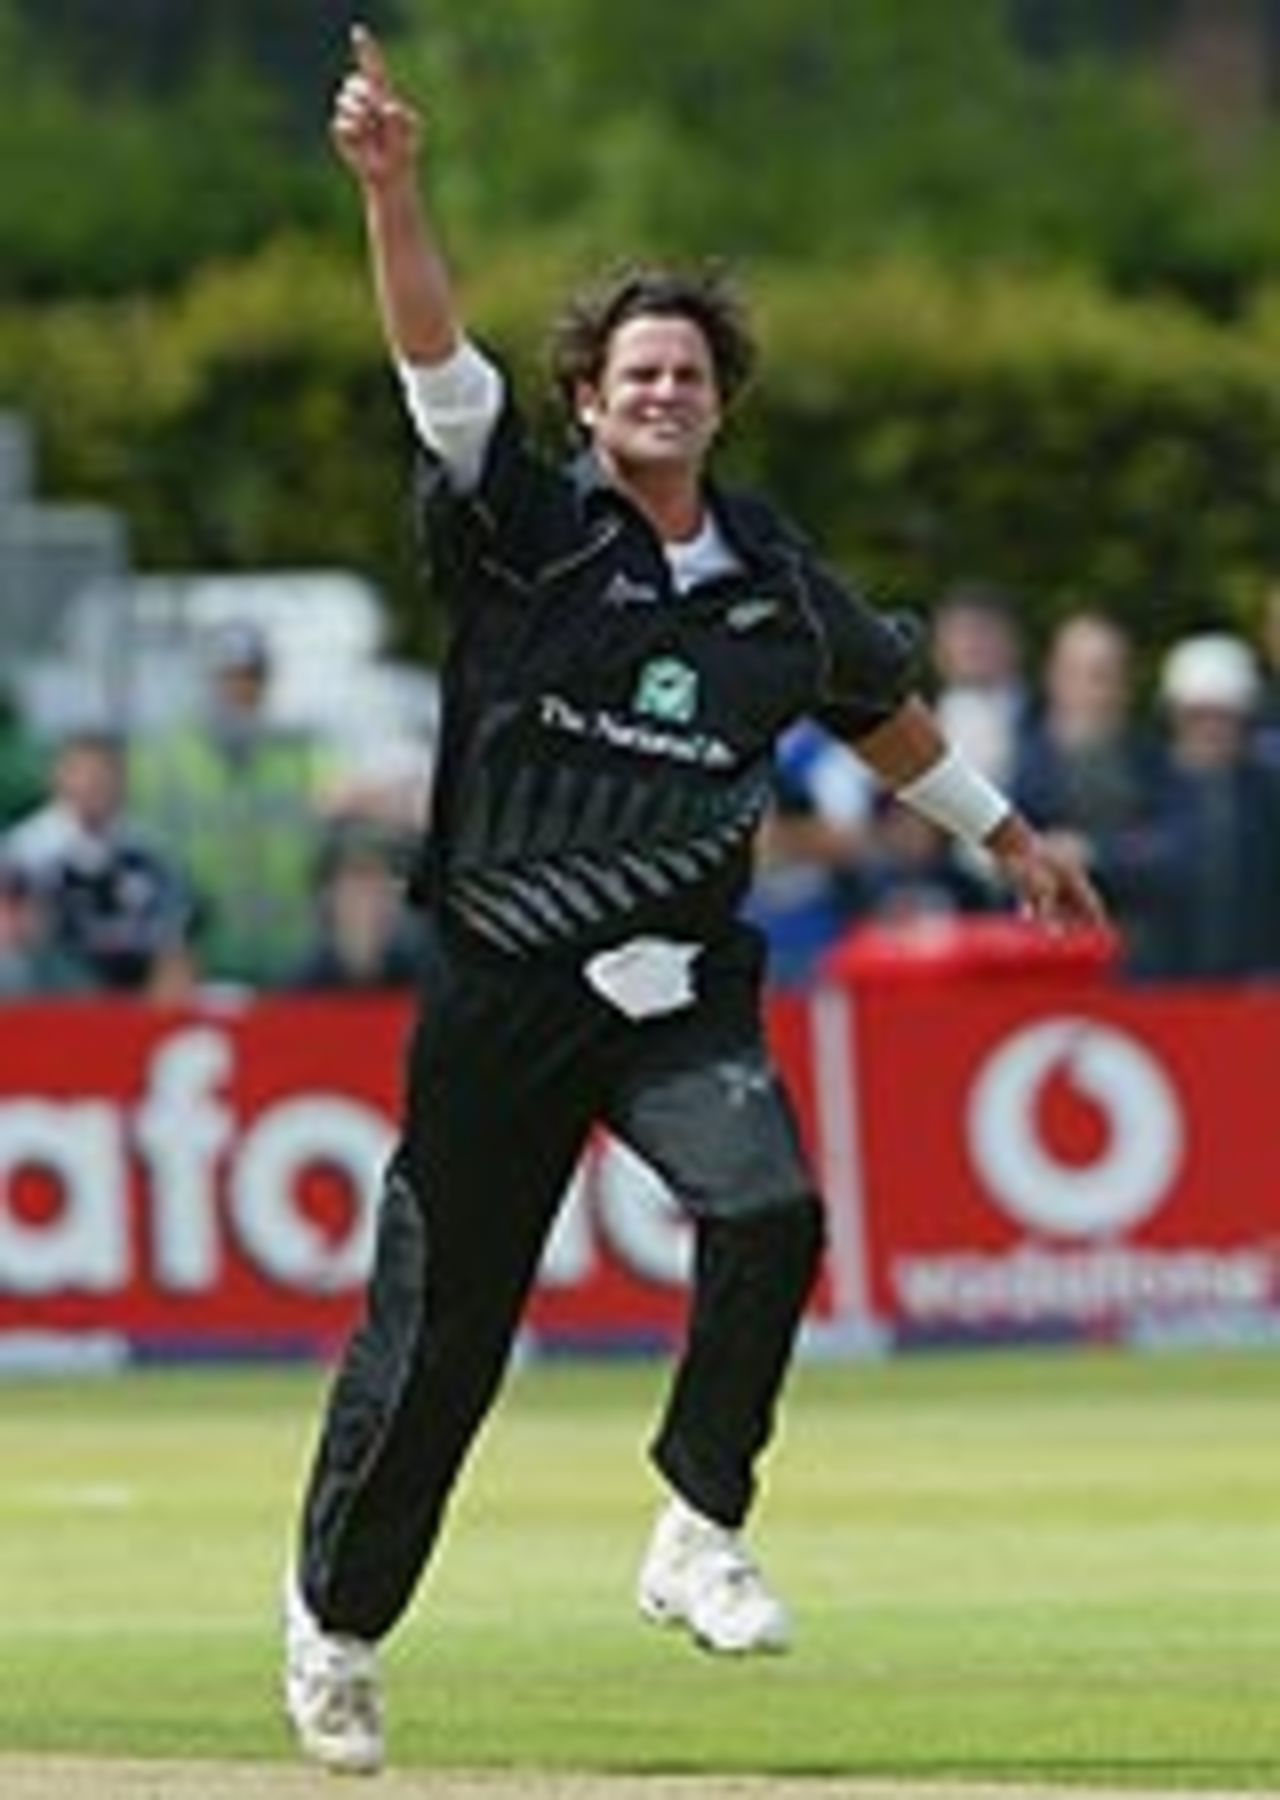 Chris Cairns celebrates another wicket, as West Indies lose seven wickets for 36 runs at Cardiff, NatWest Series, July 3, 2004